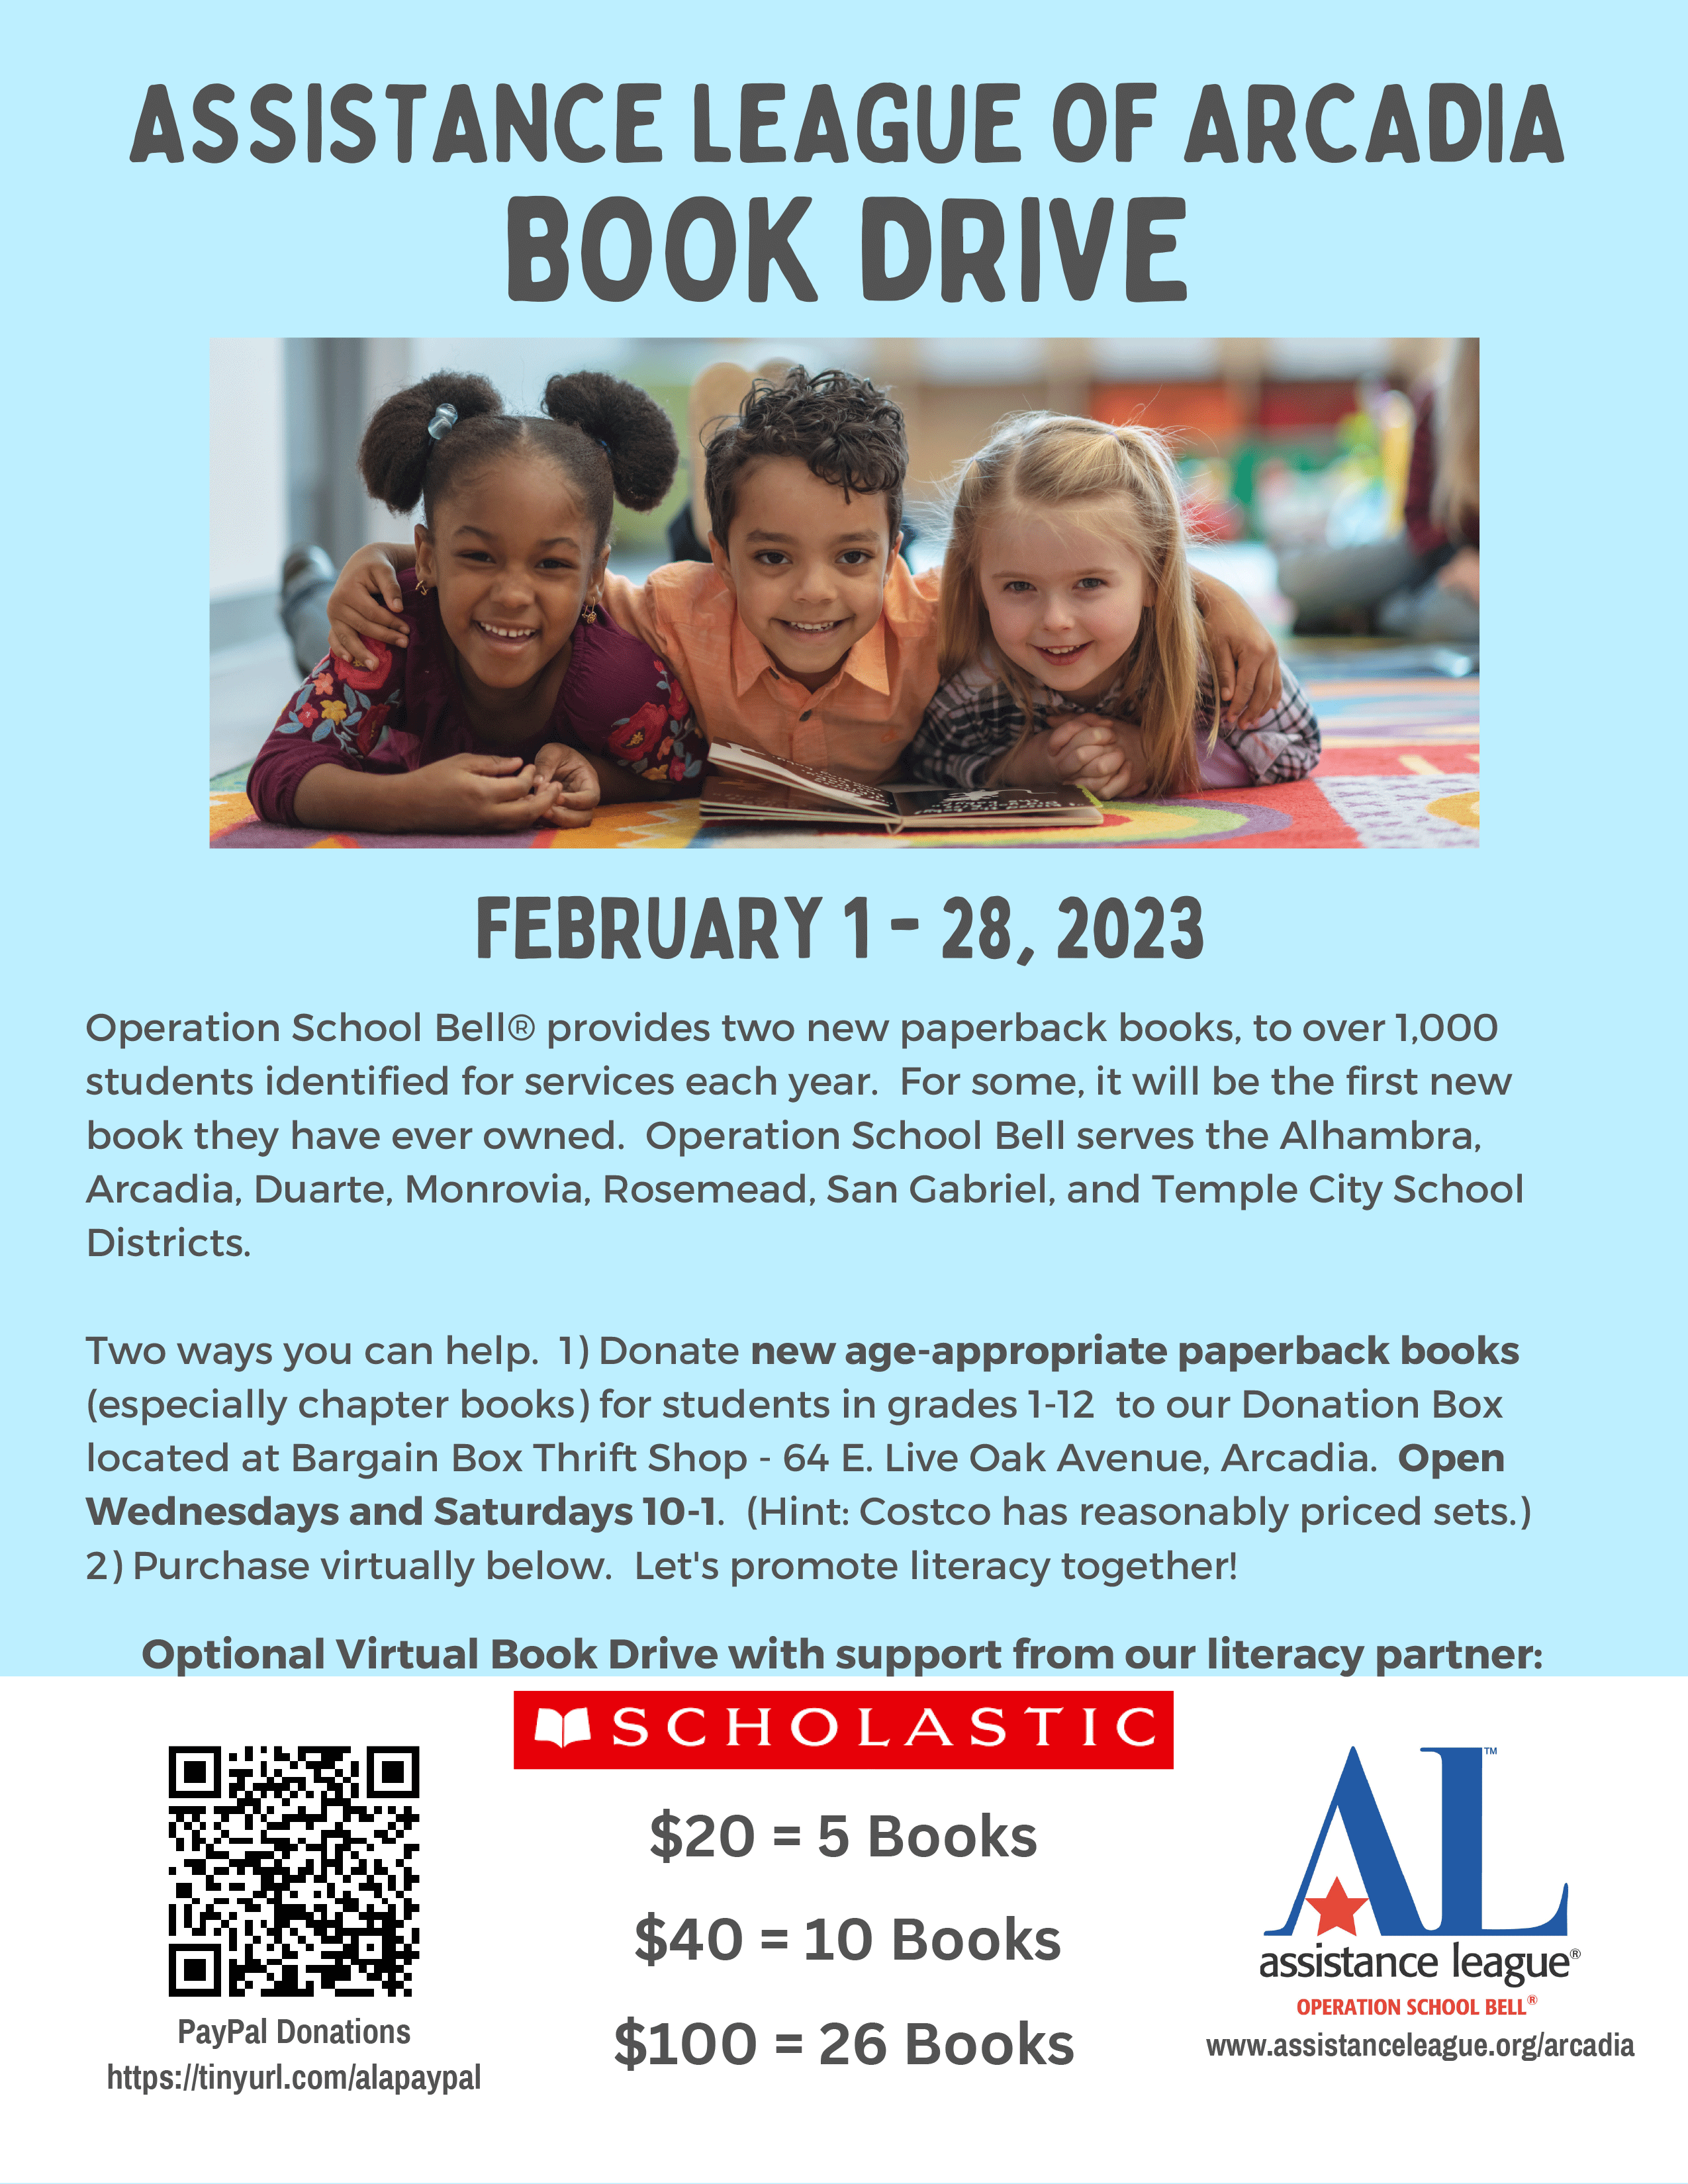 Assistance League of Arcadia book drive for February 